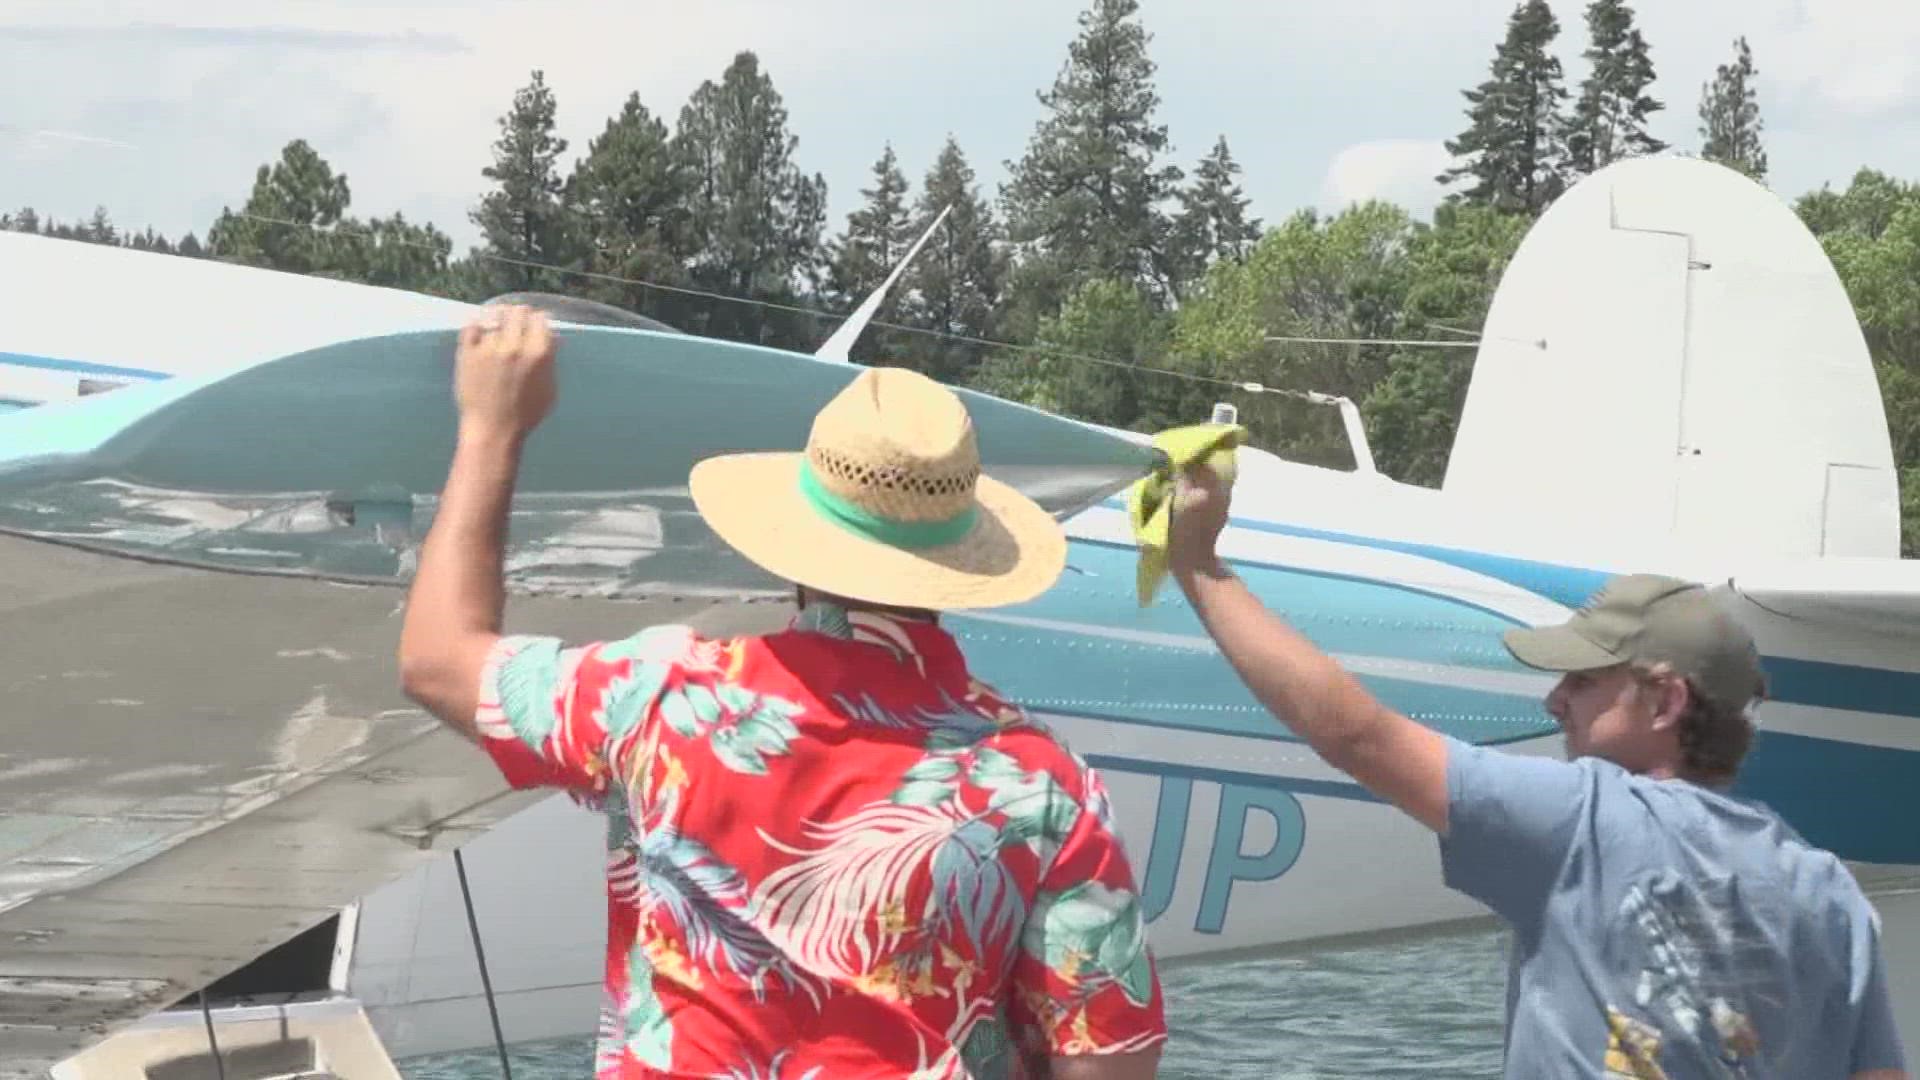 After a two year absence, Brooke’s Seaplane Service will be taking flights over Lake Coeur d’Alene.